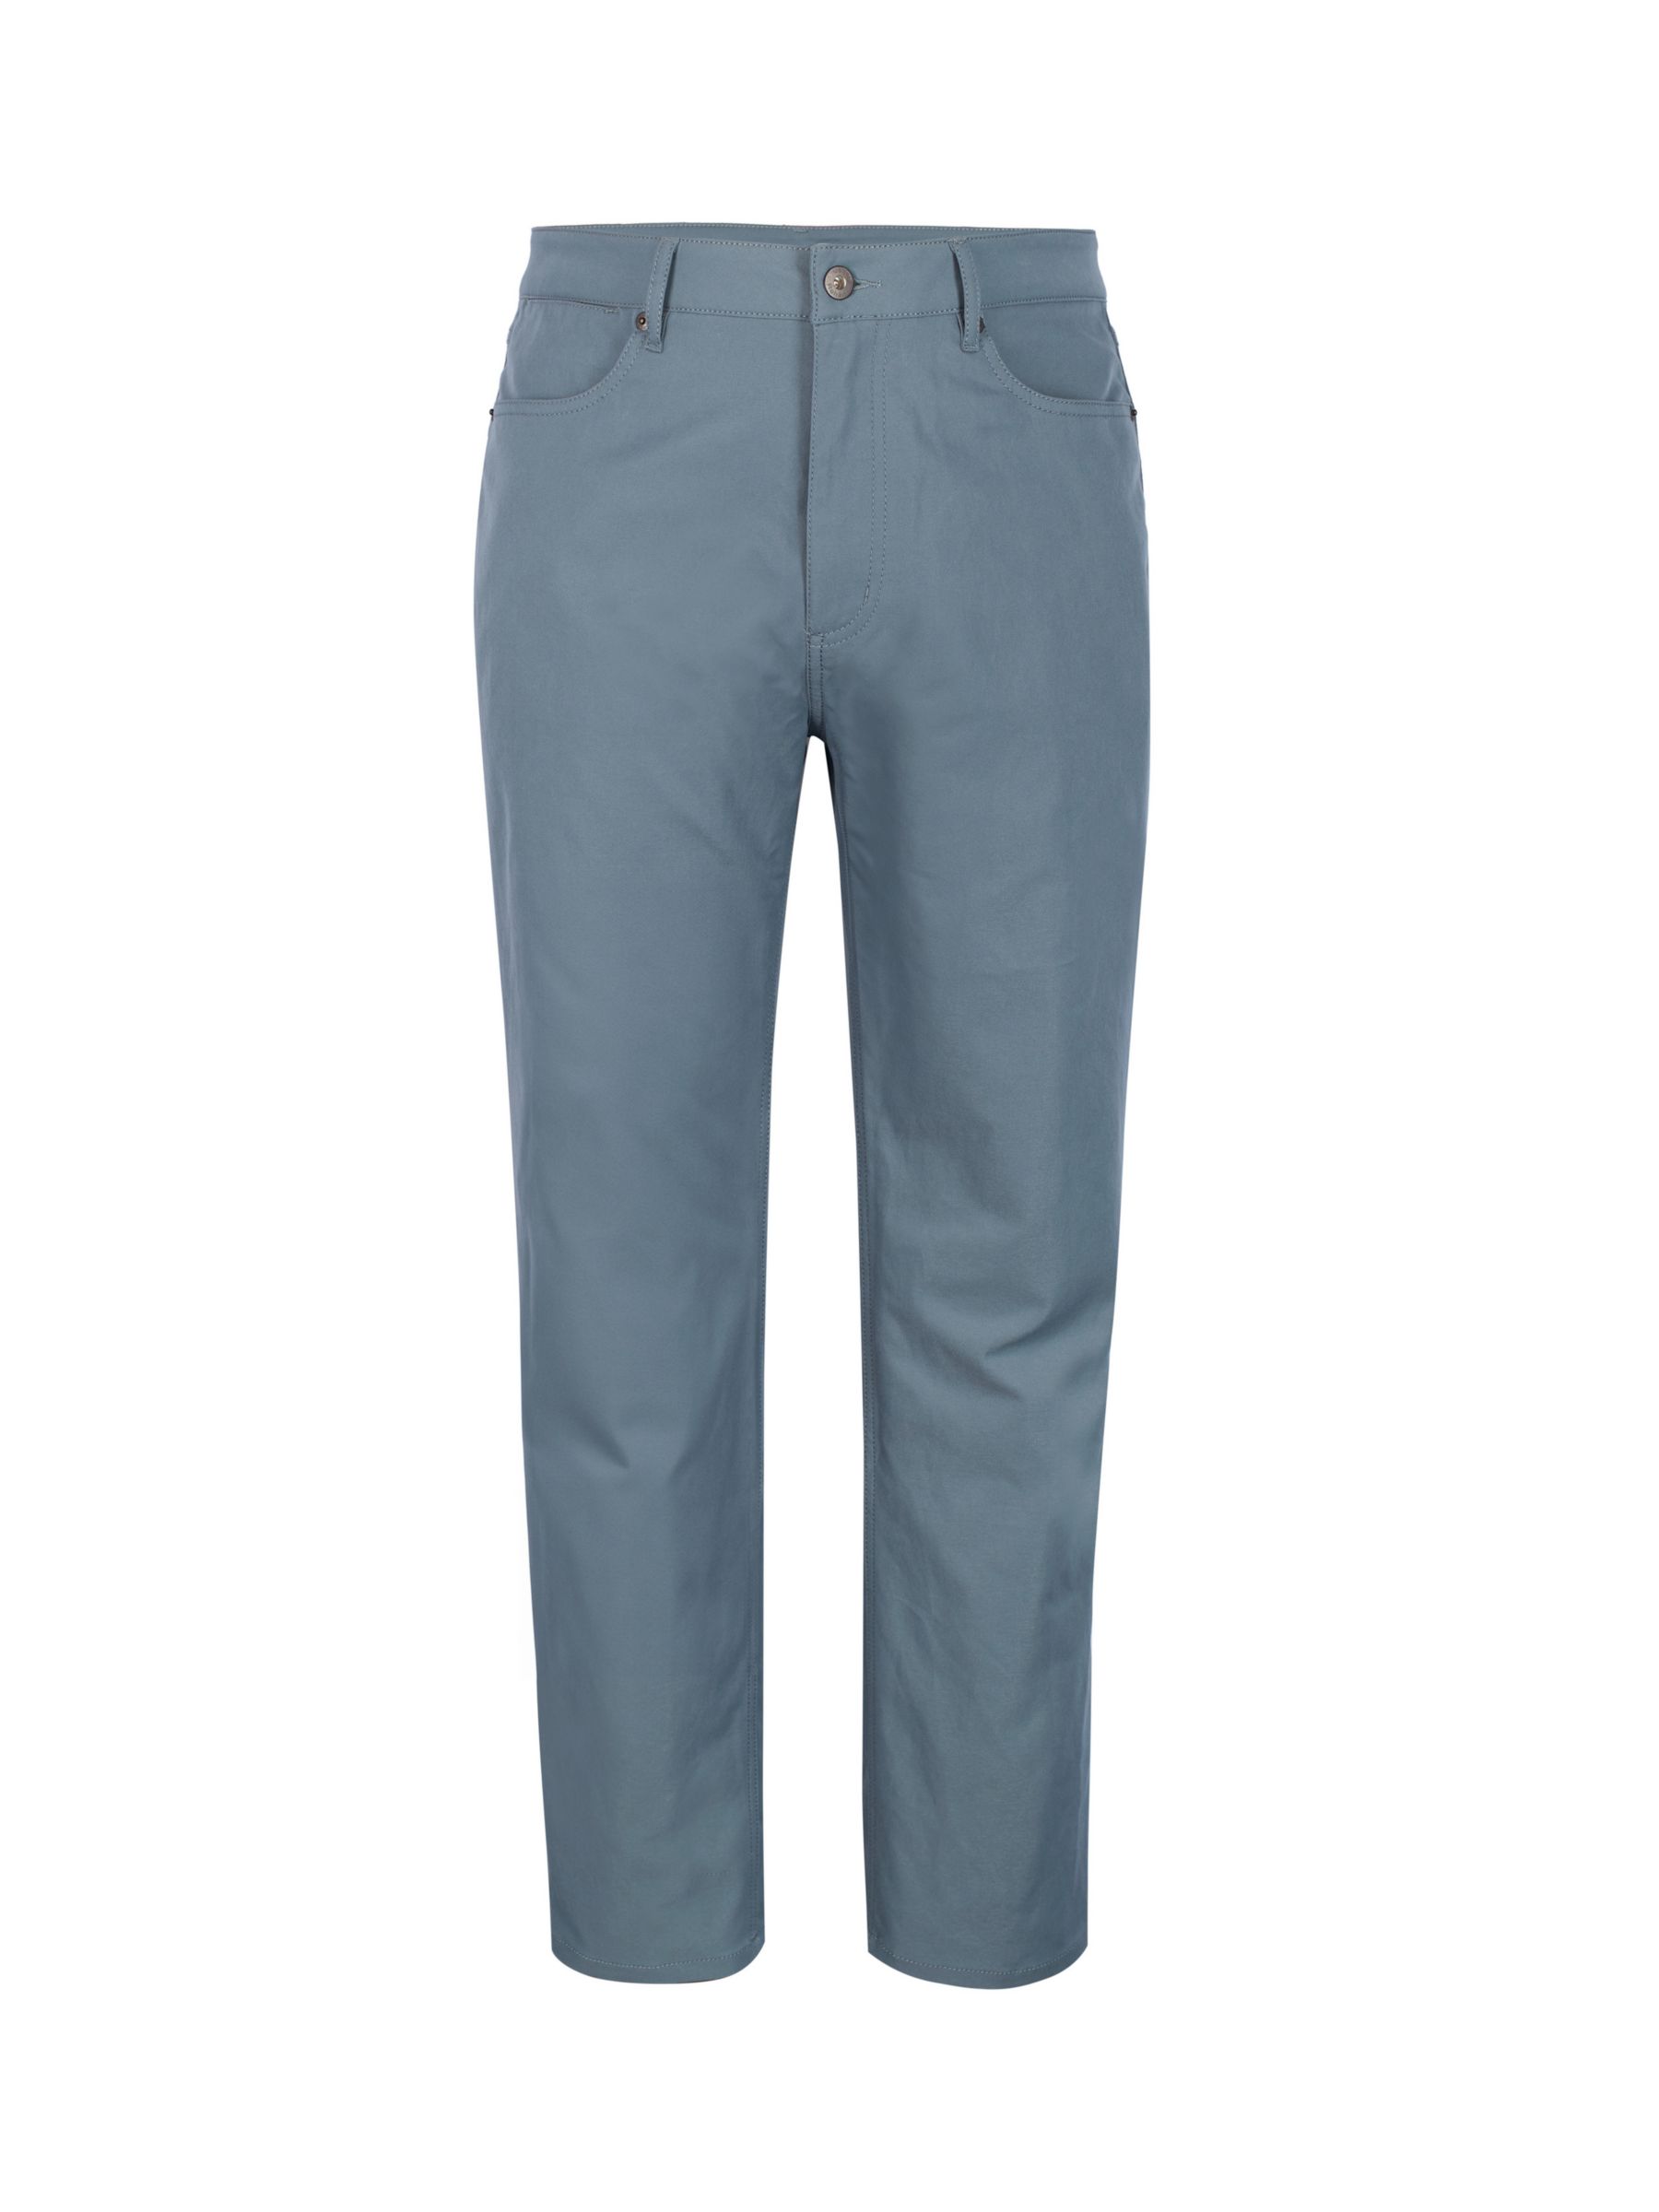 Buy Rohan District Smart Everyday Trousers Online at johnlewis.com